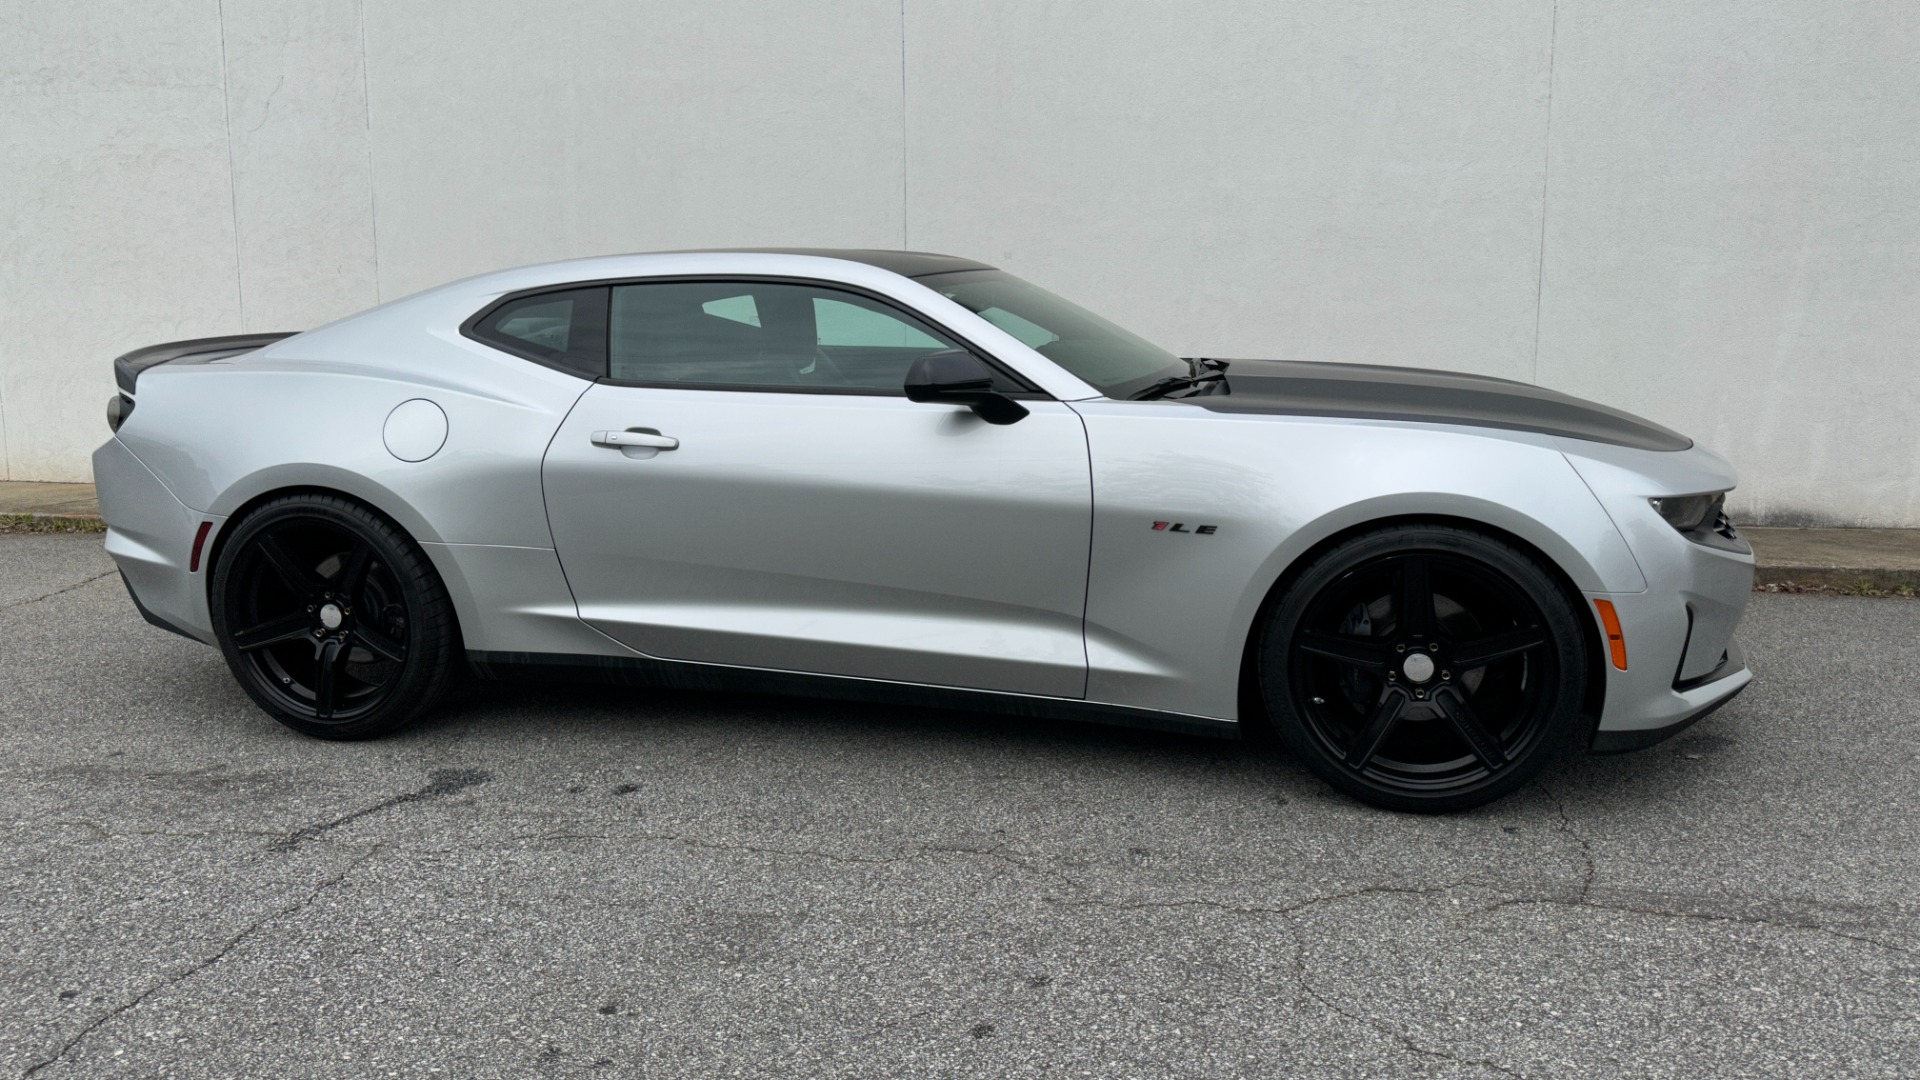 Used 2019 Chevrolet Camaro 2LT / 6SPD MANUAL / RECARO SEATS / UPGRADED WHEELS for sale $29,900 at Formula Imports in Charlotte NC 28227 6